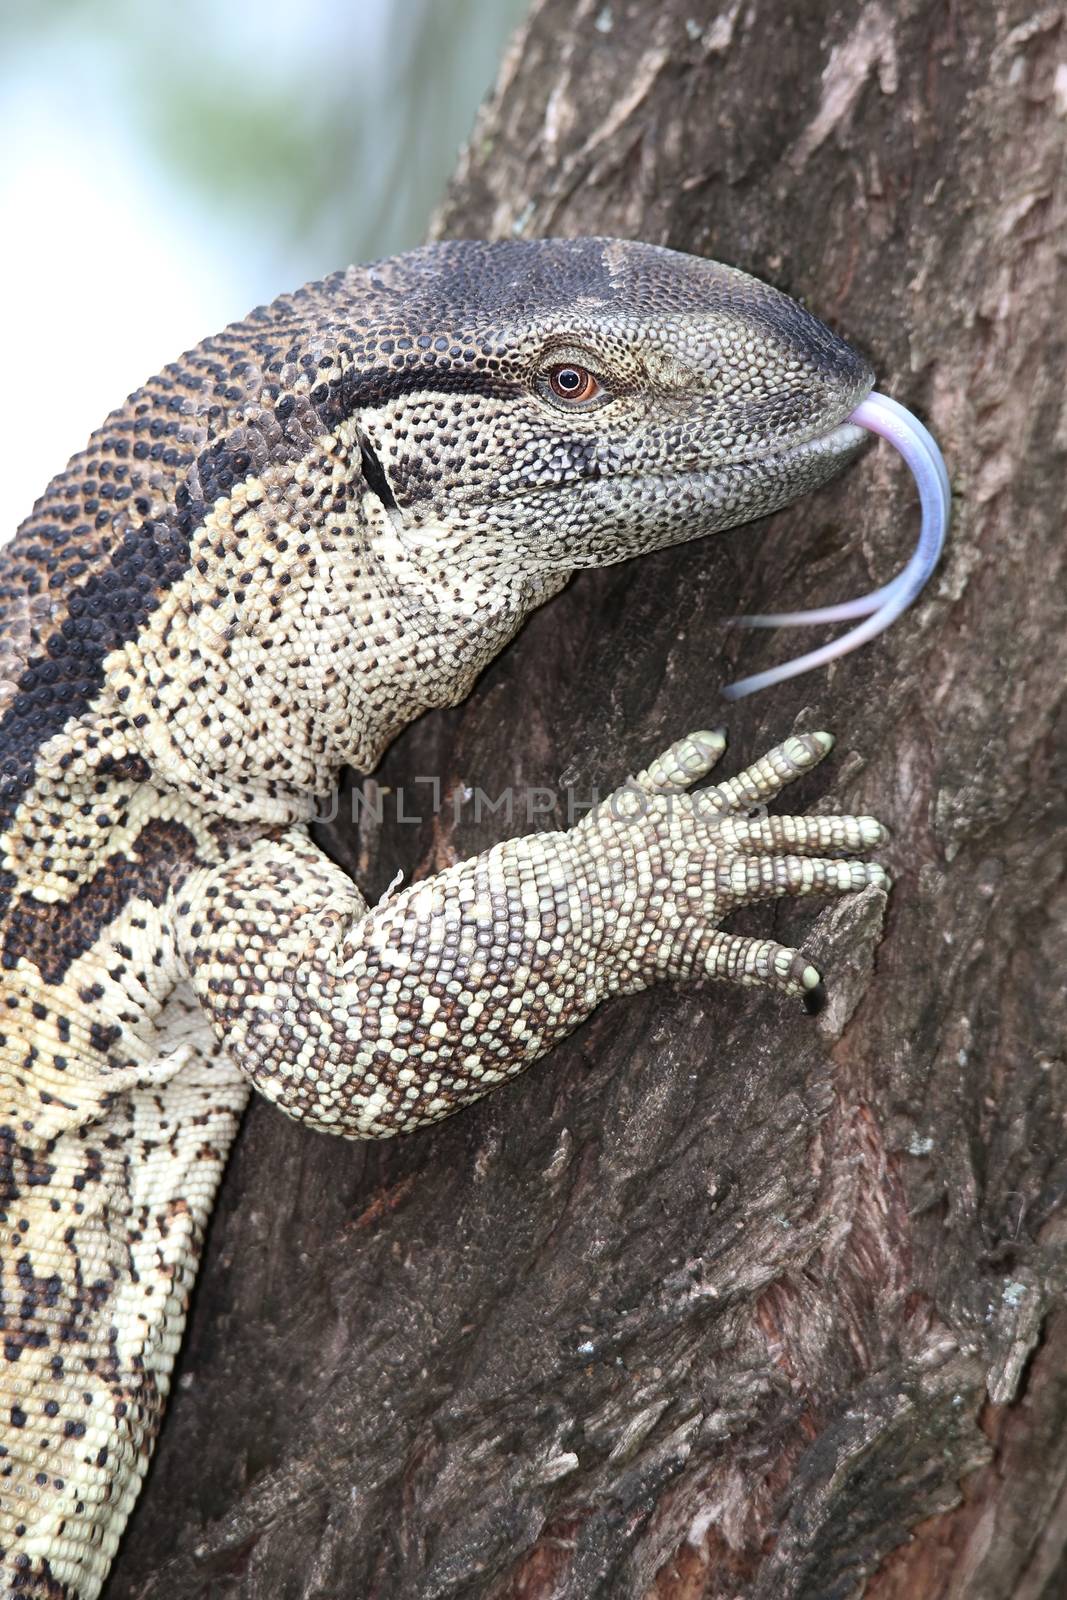 Leguaan or water monitor with a long forked tongue and scaly skin